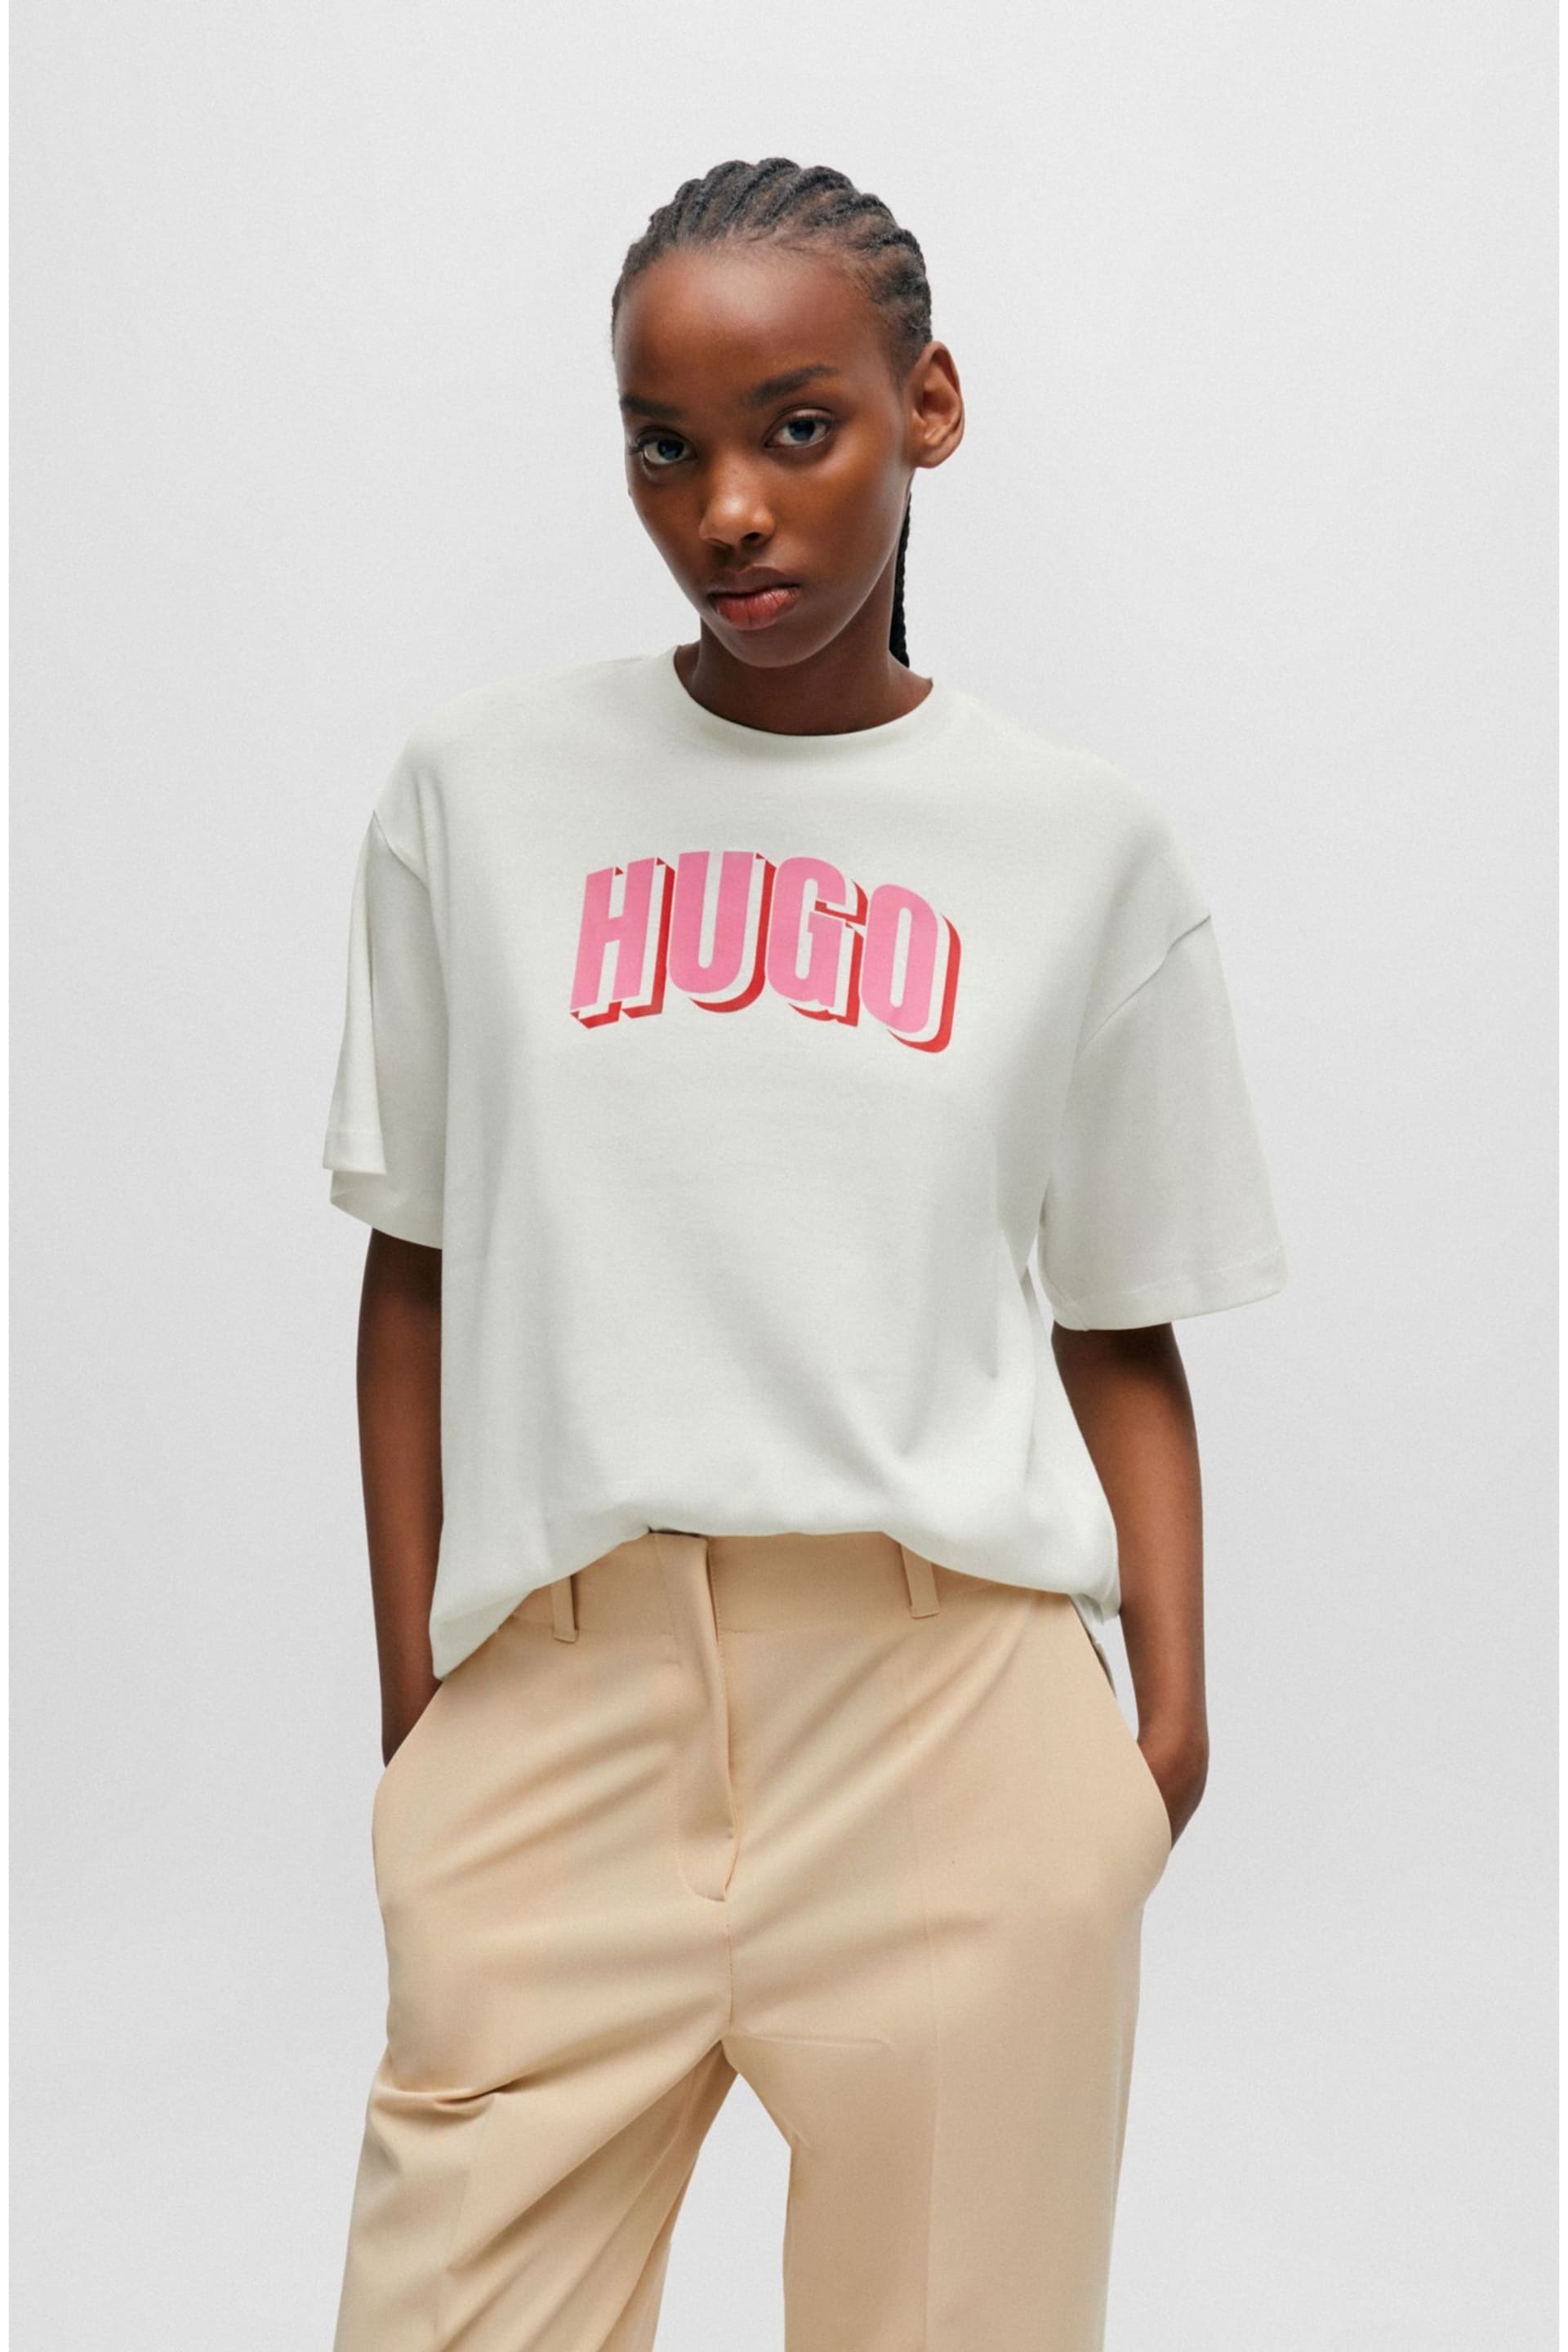 HUGO Cream Relaxed Fit Logo T-Shirt - Image 1 of 4